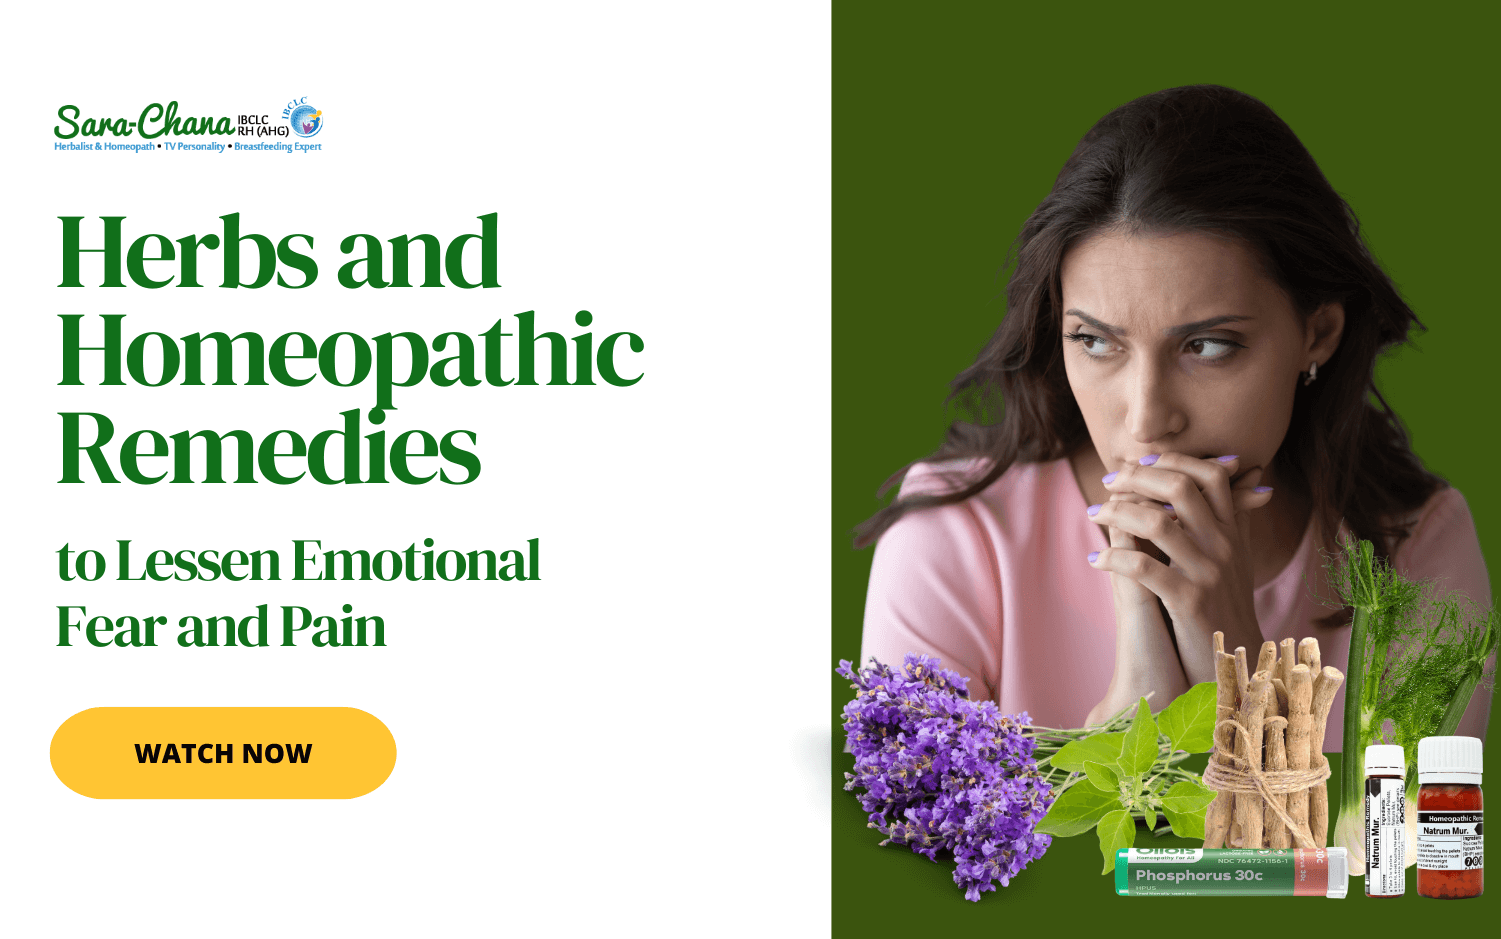 Herbs and Homeopathic Remedies to Lessen Emotional Fear and Pain